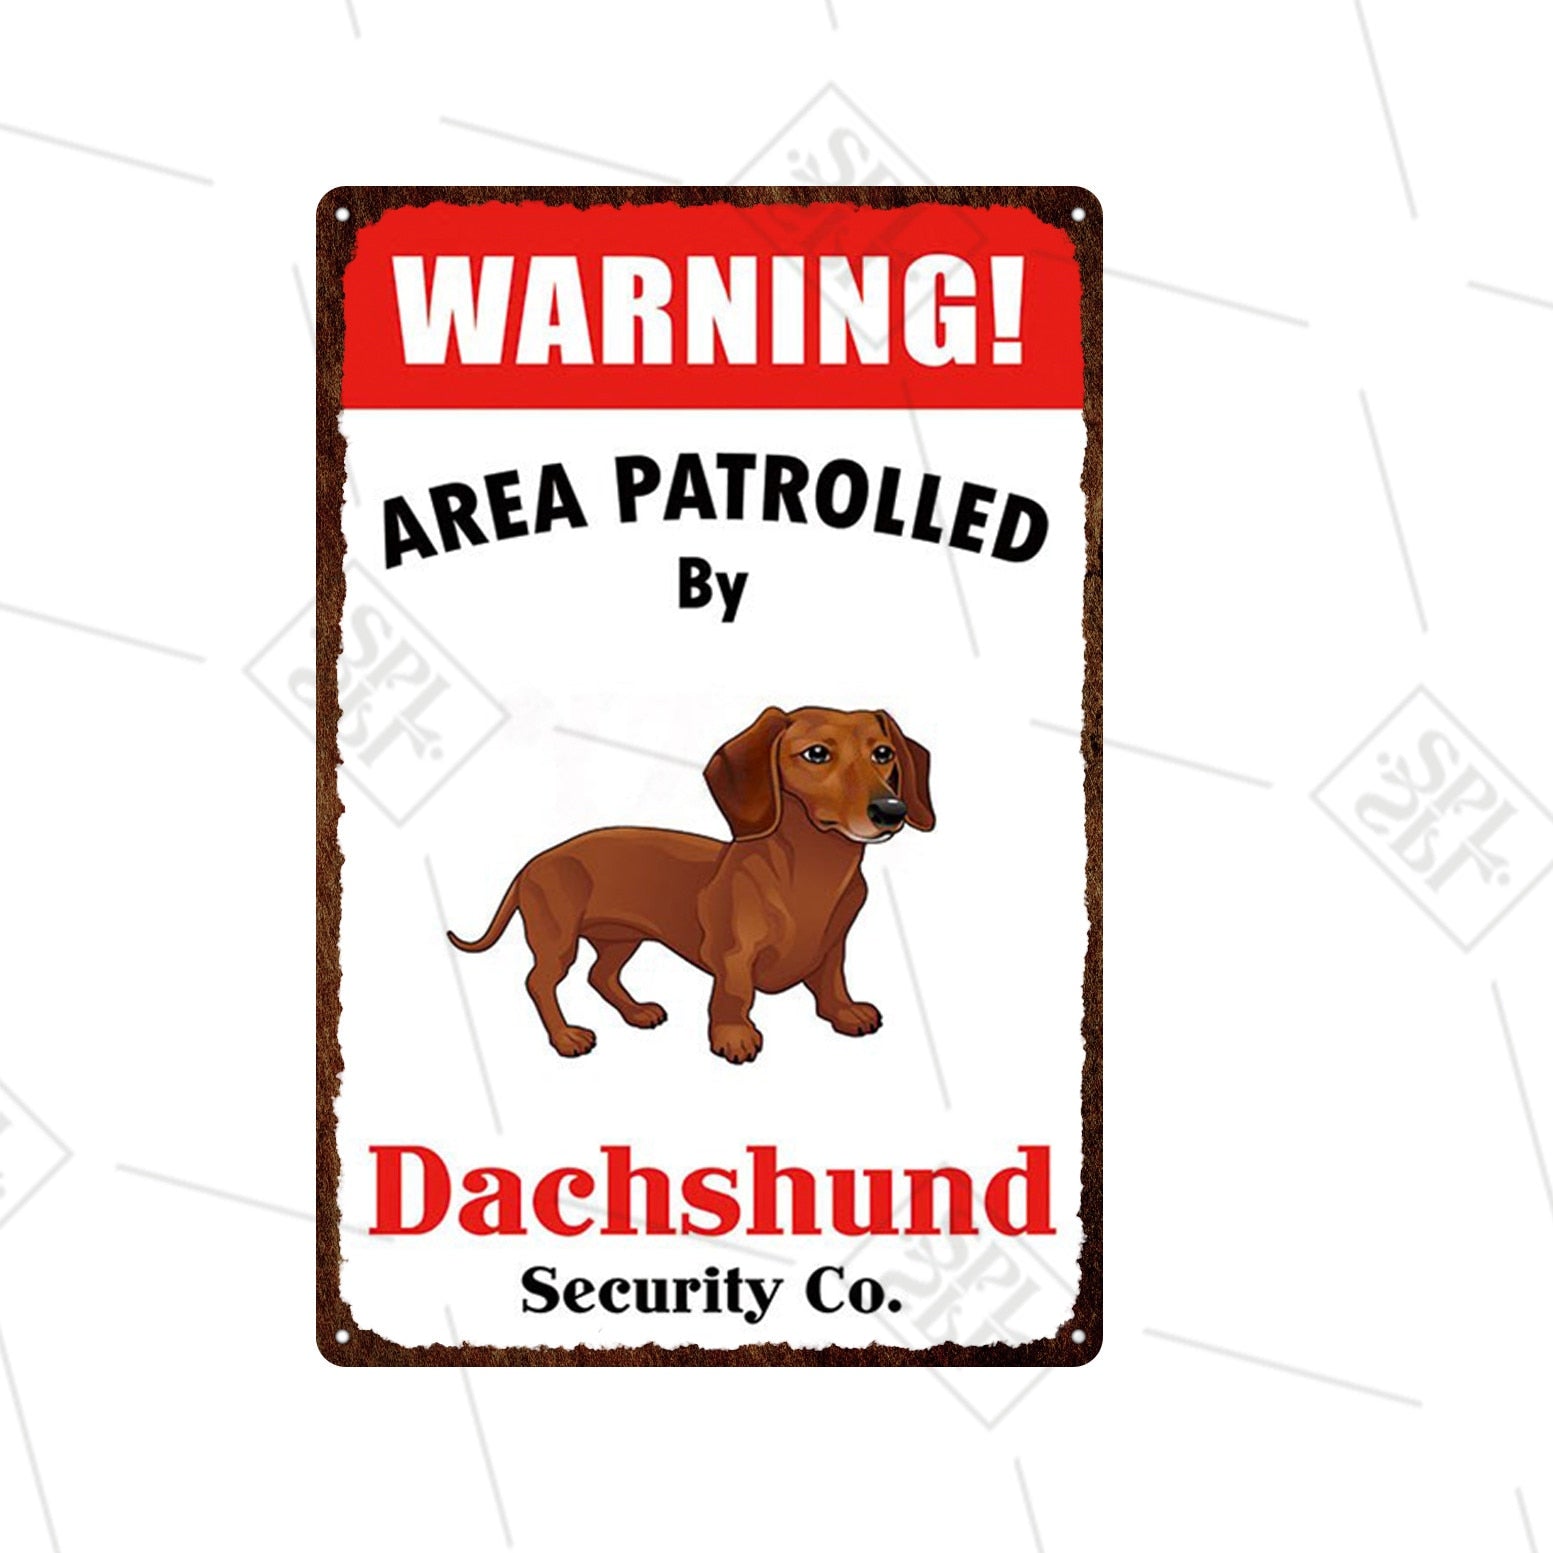 "Warning Area Patrolled by 'Dog' Security & Co" signs - Style's Bug Dachshund